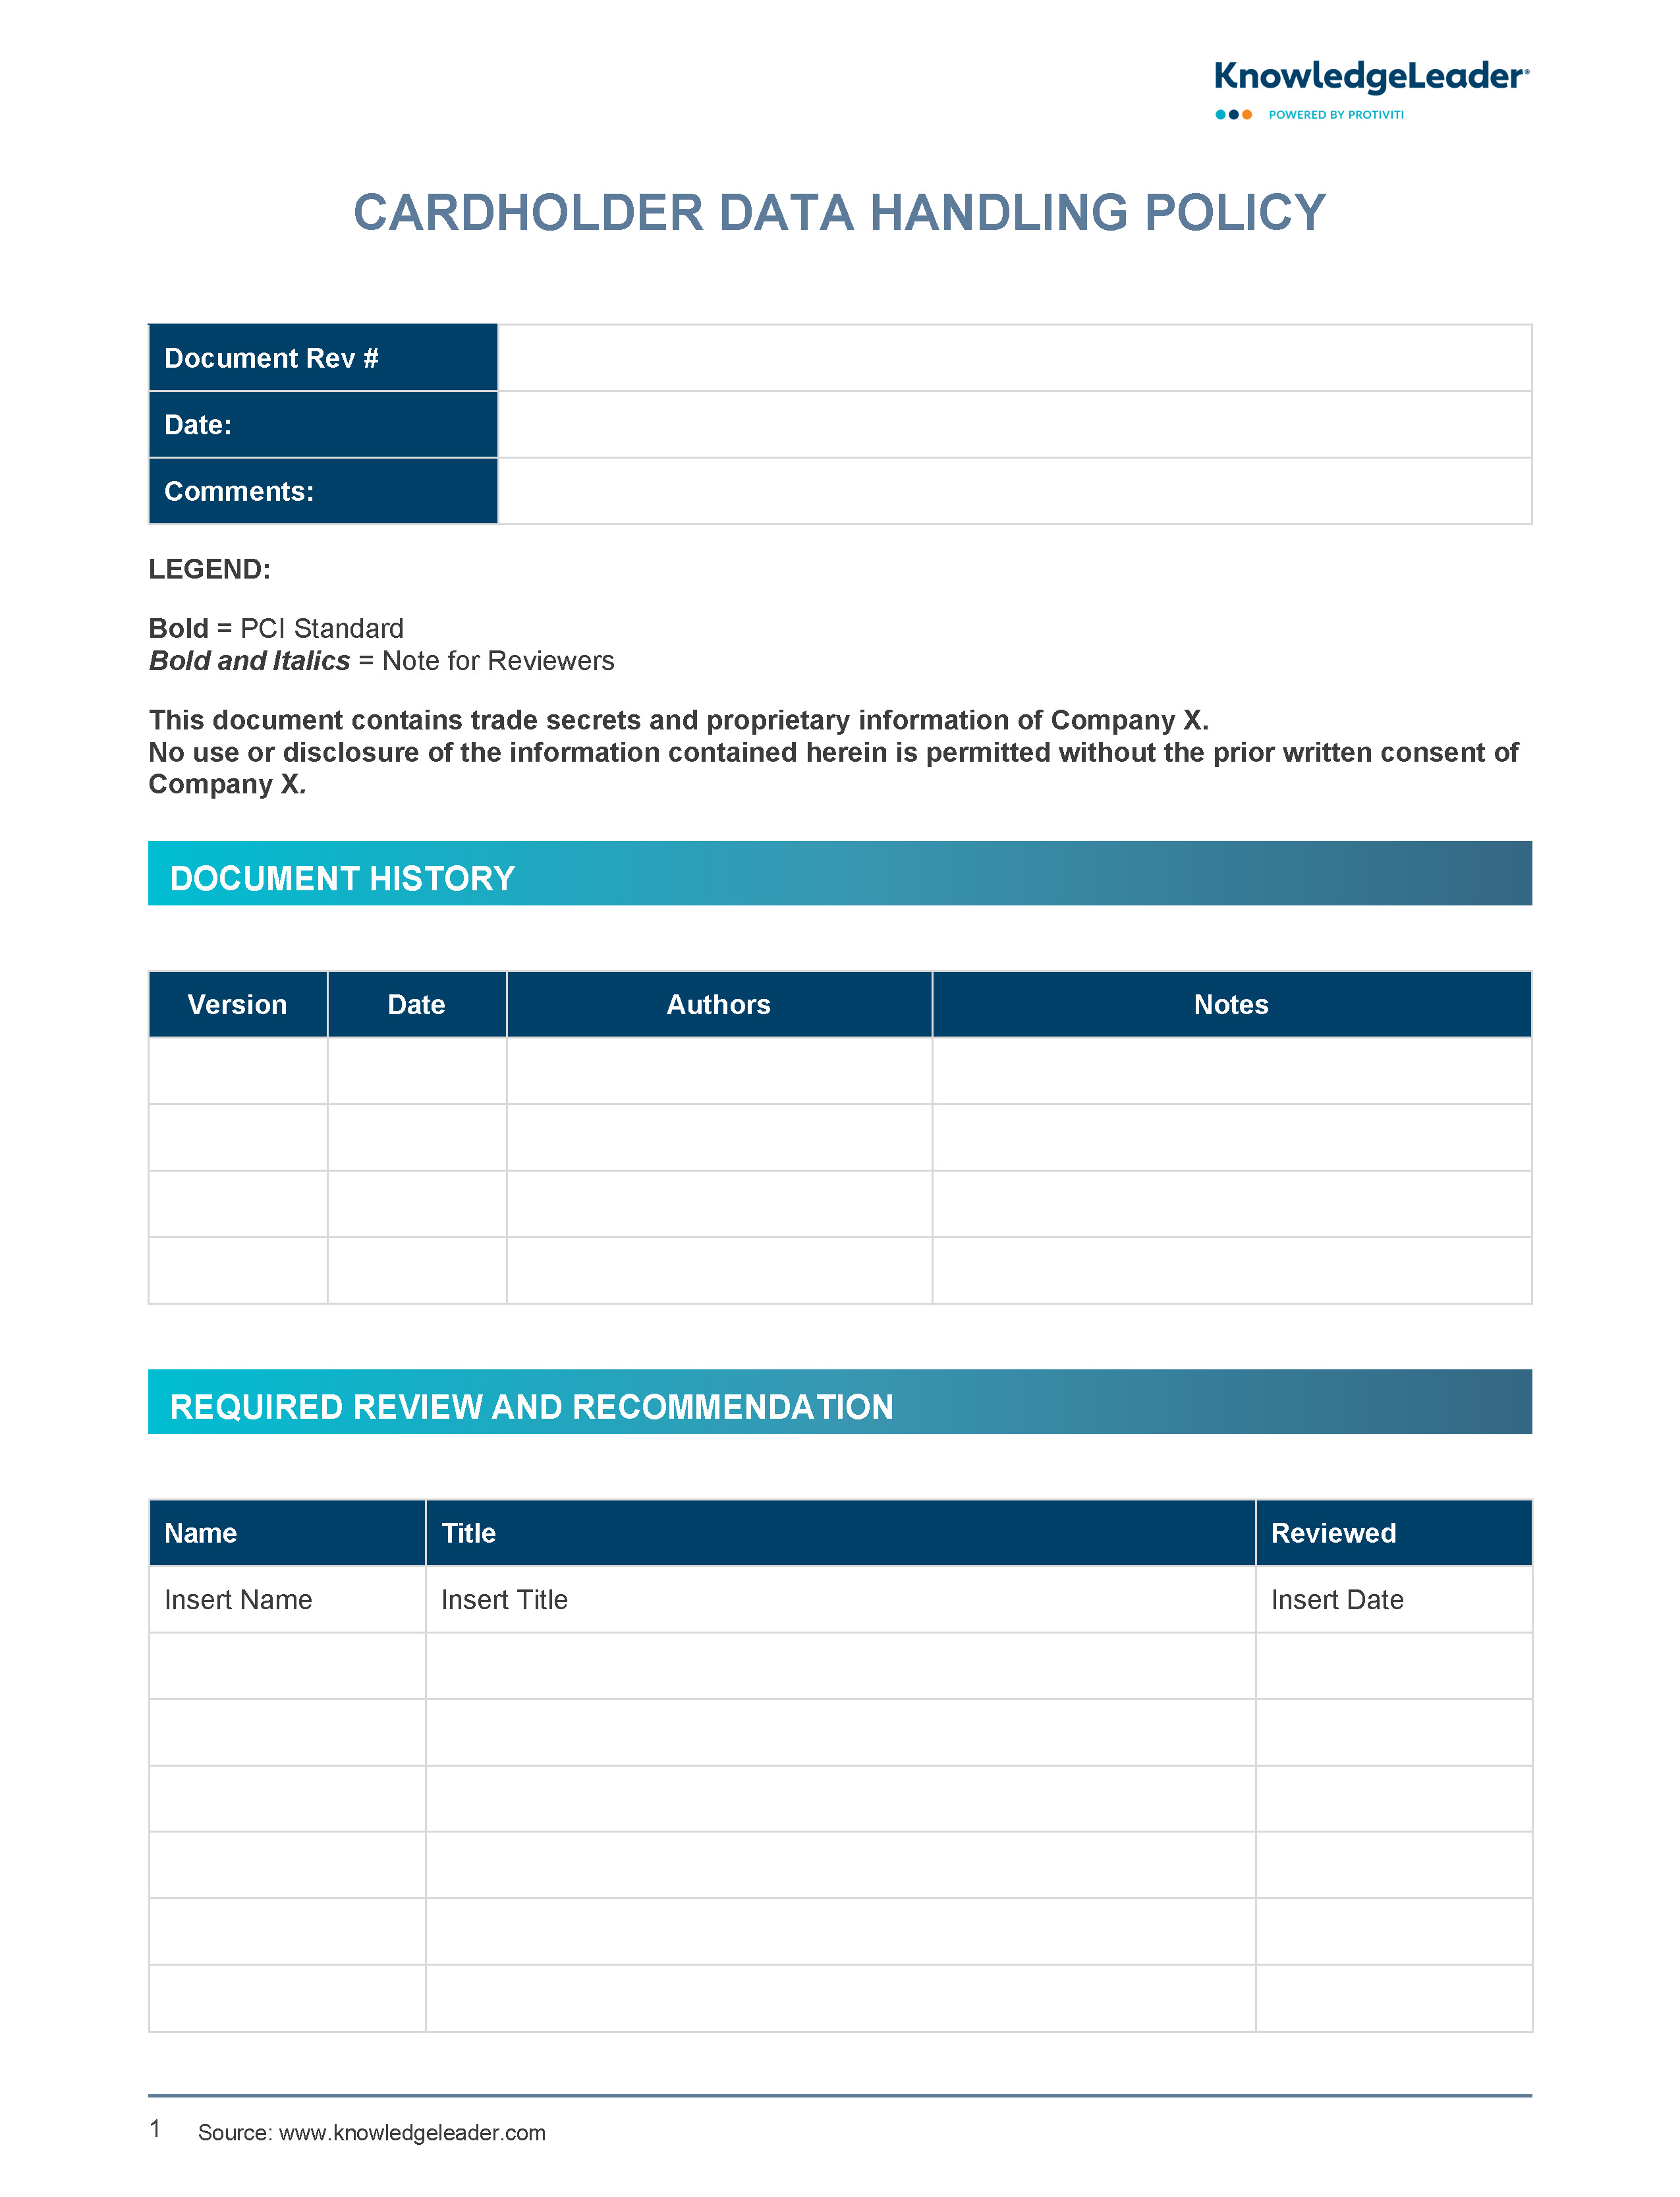 Screenshot of the first page of Cardholder Data Handling Policy.